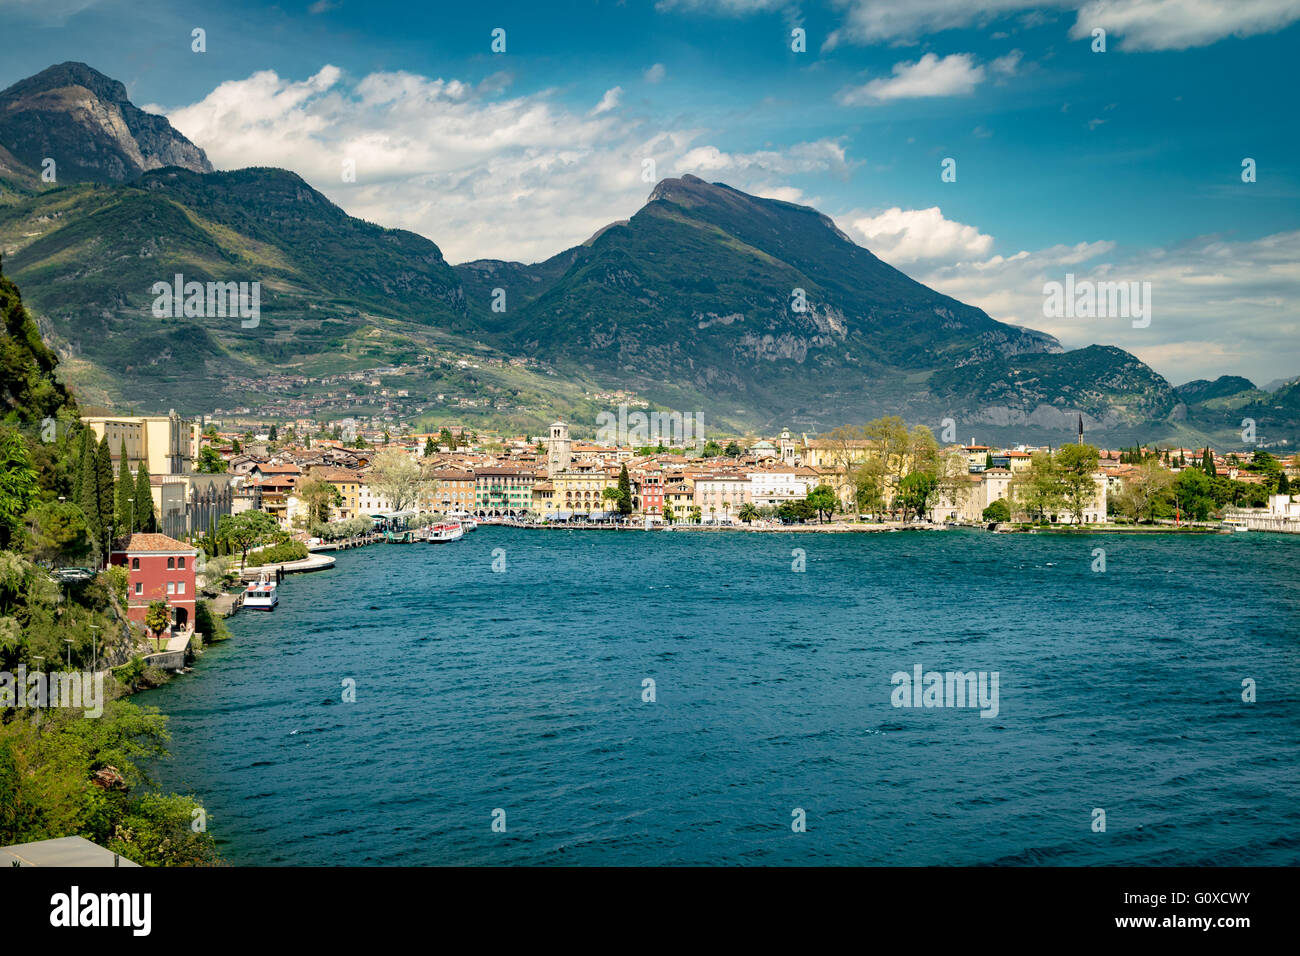 Panorama of the gorgeous Lake Garda surrounded by mountains in Riva del Garda, Italy. Stock Photo